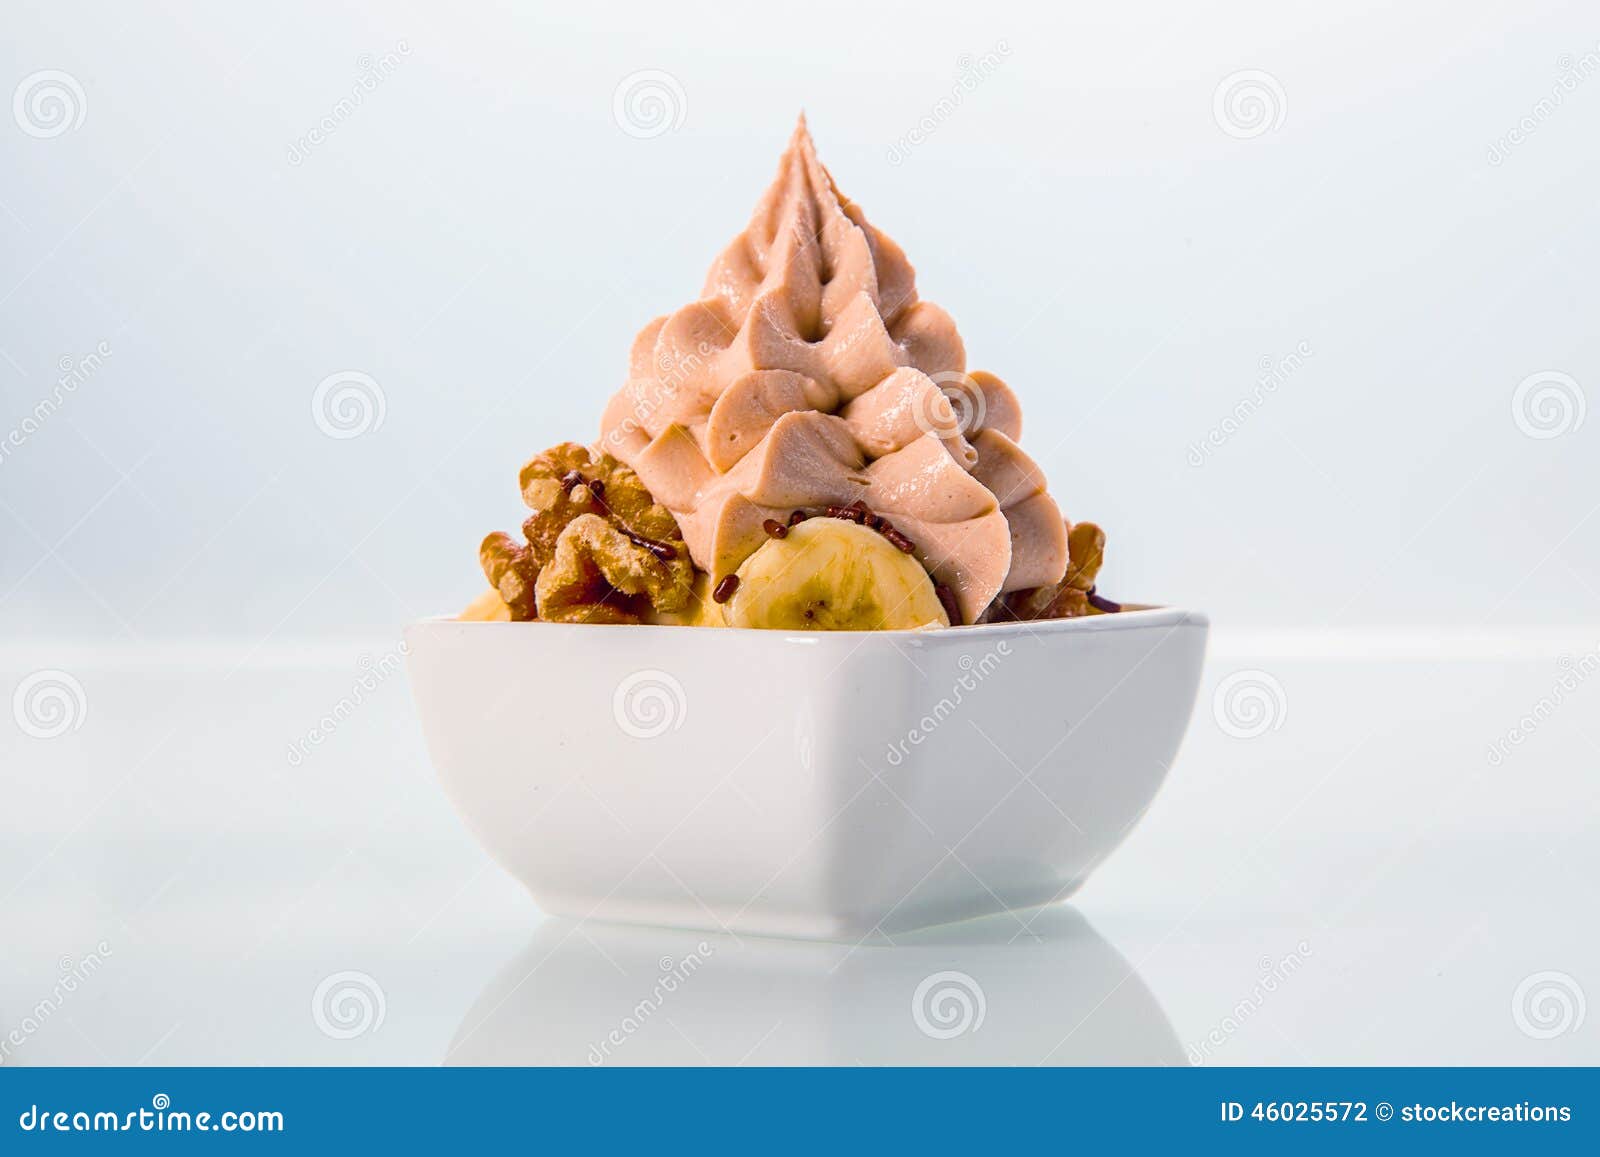 bowl of delicious nutty frozen yoghurt